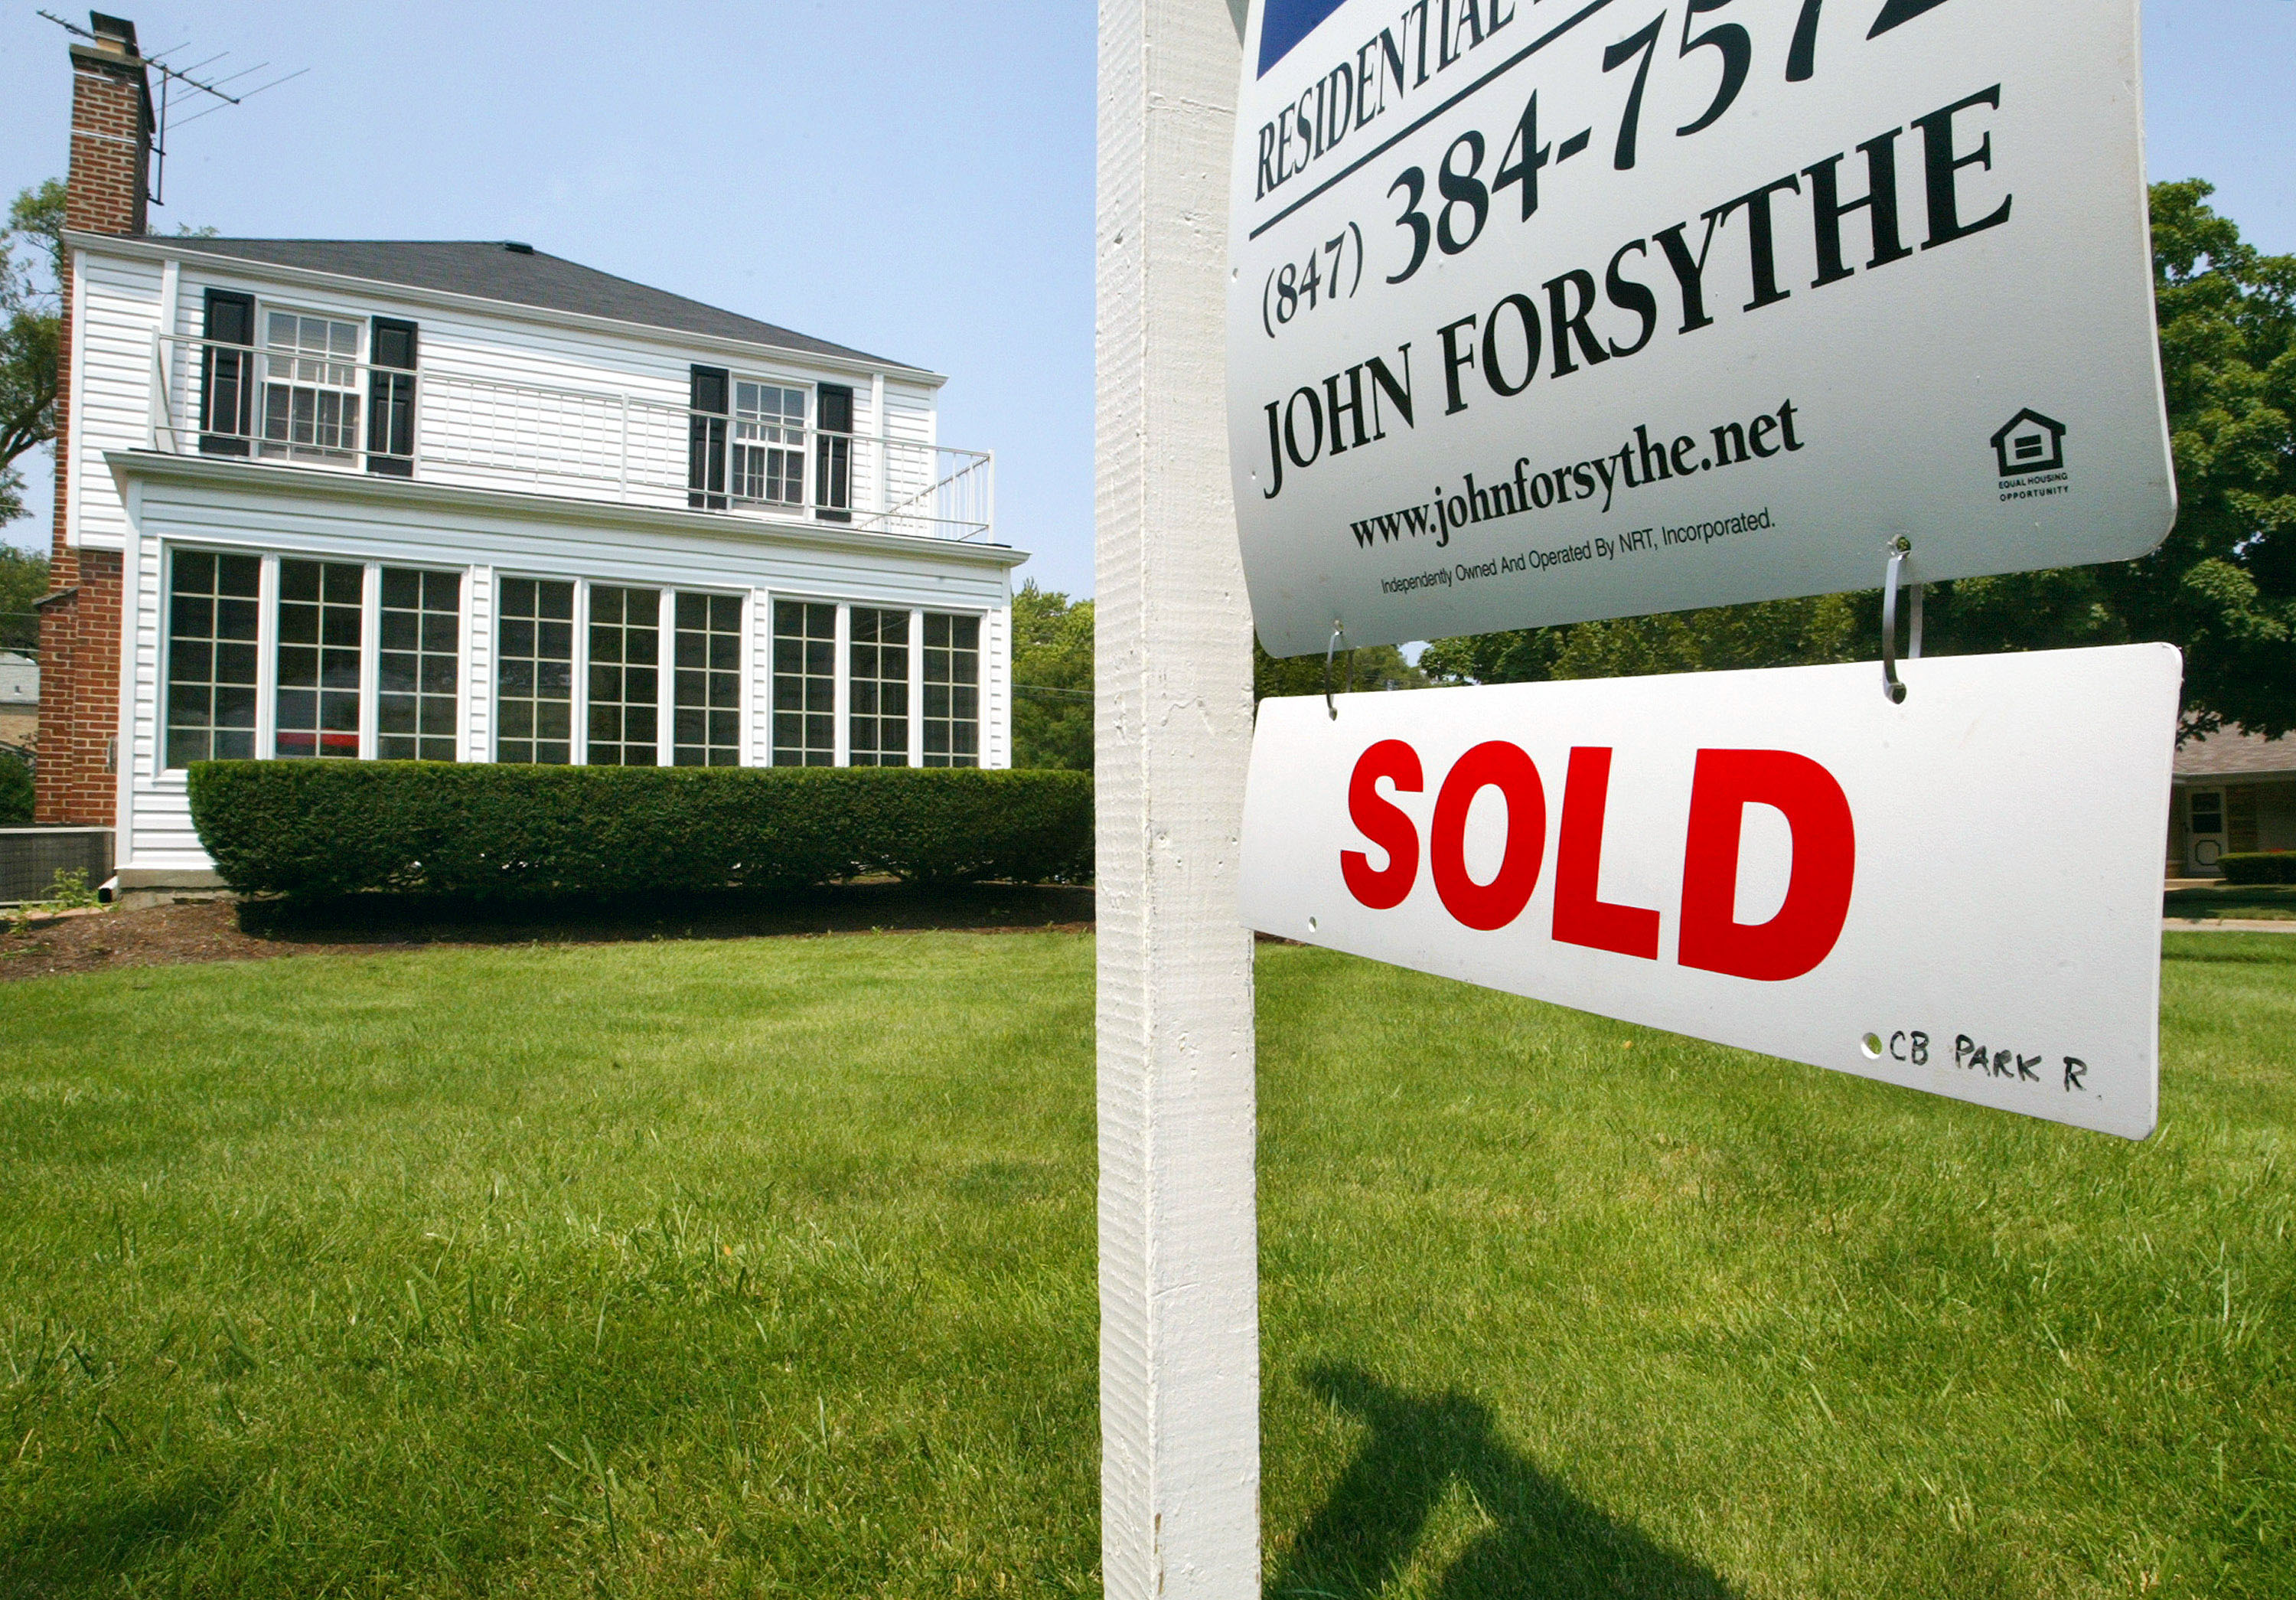 U.S. Home Prices Have Fully Recovered From The Great Recession